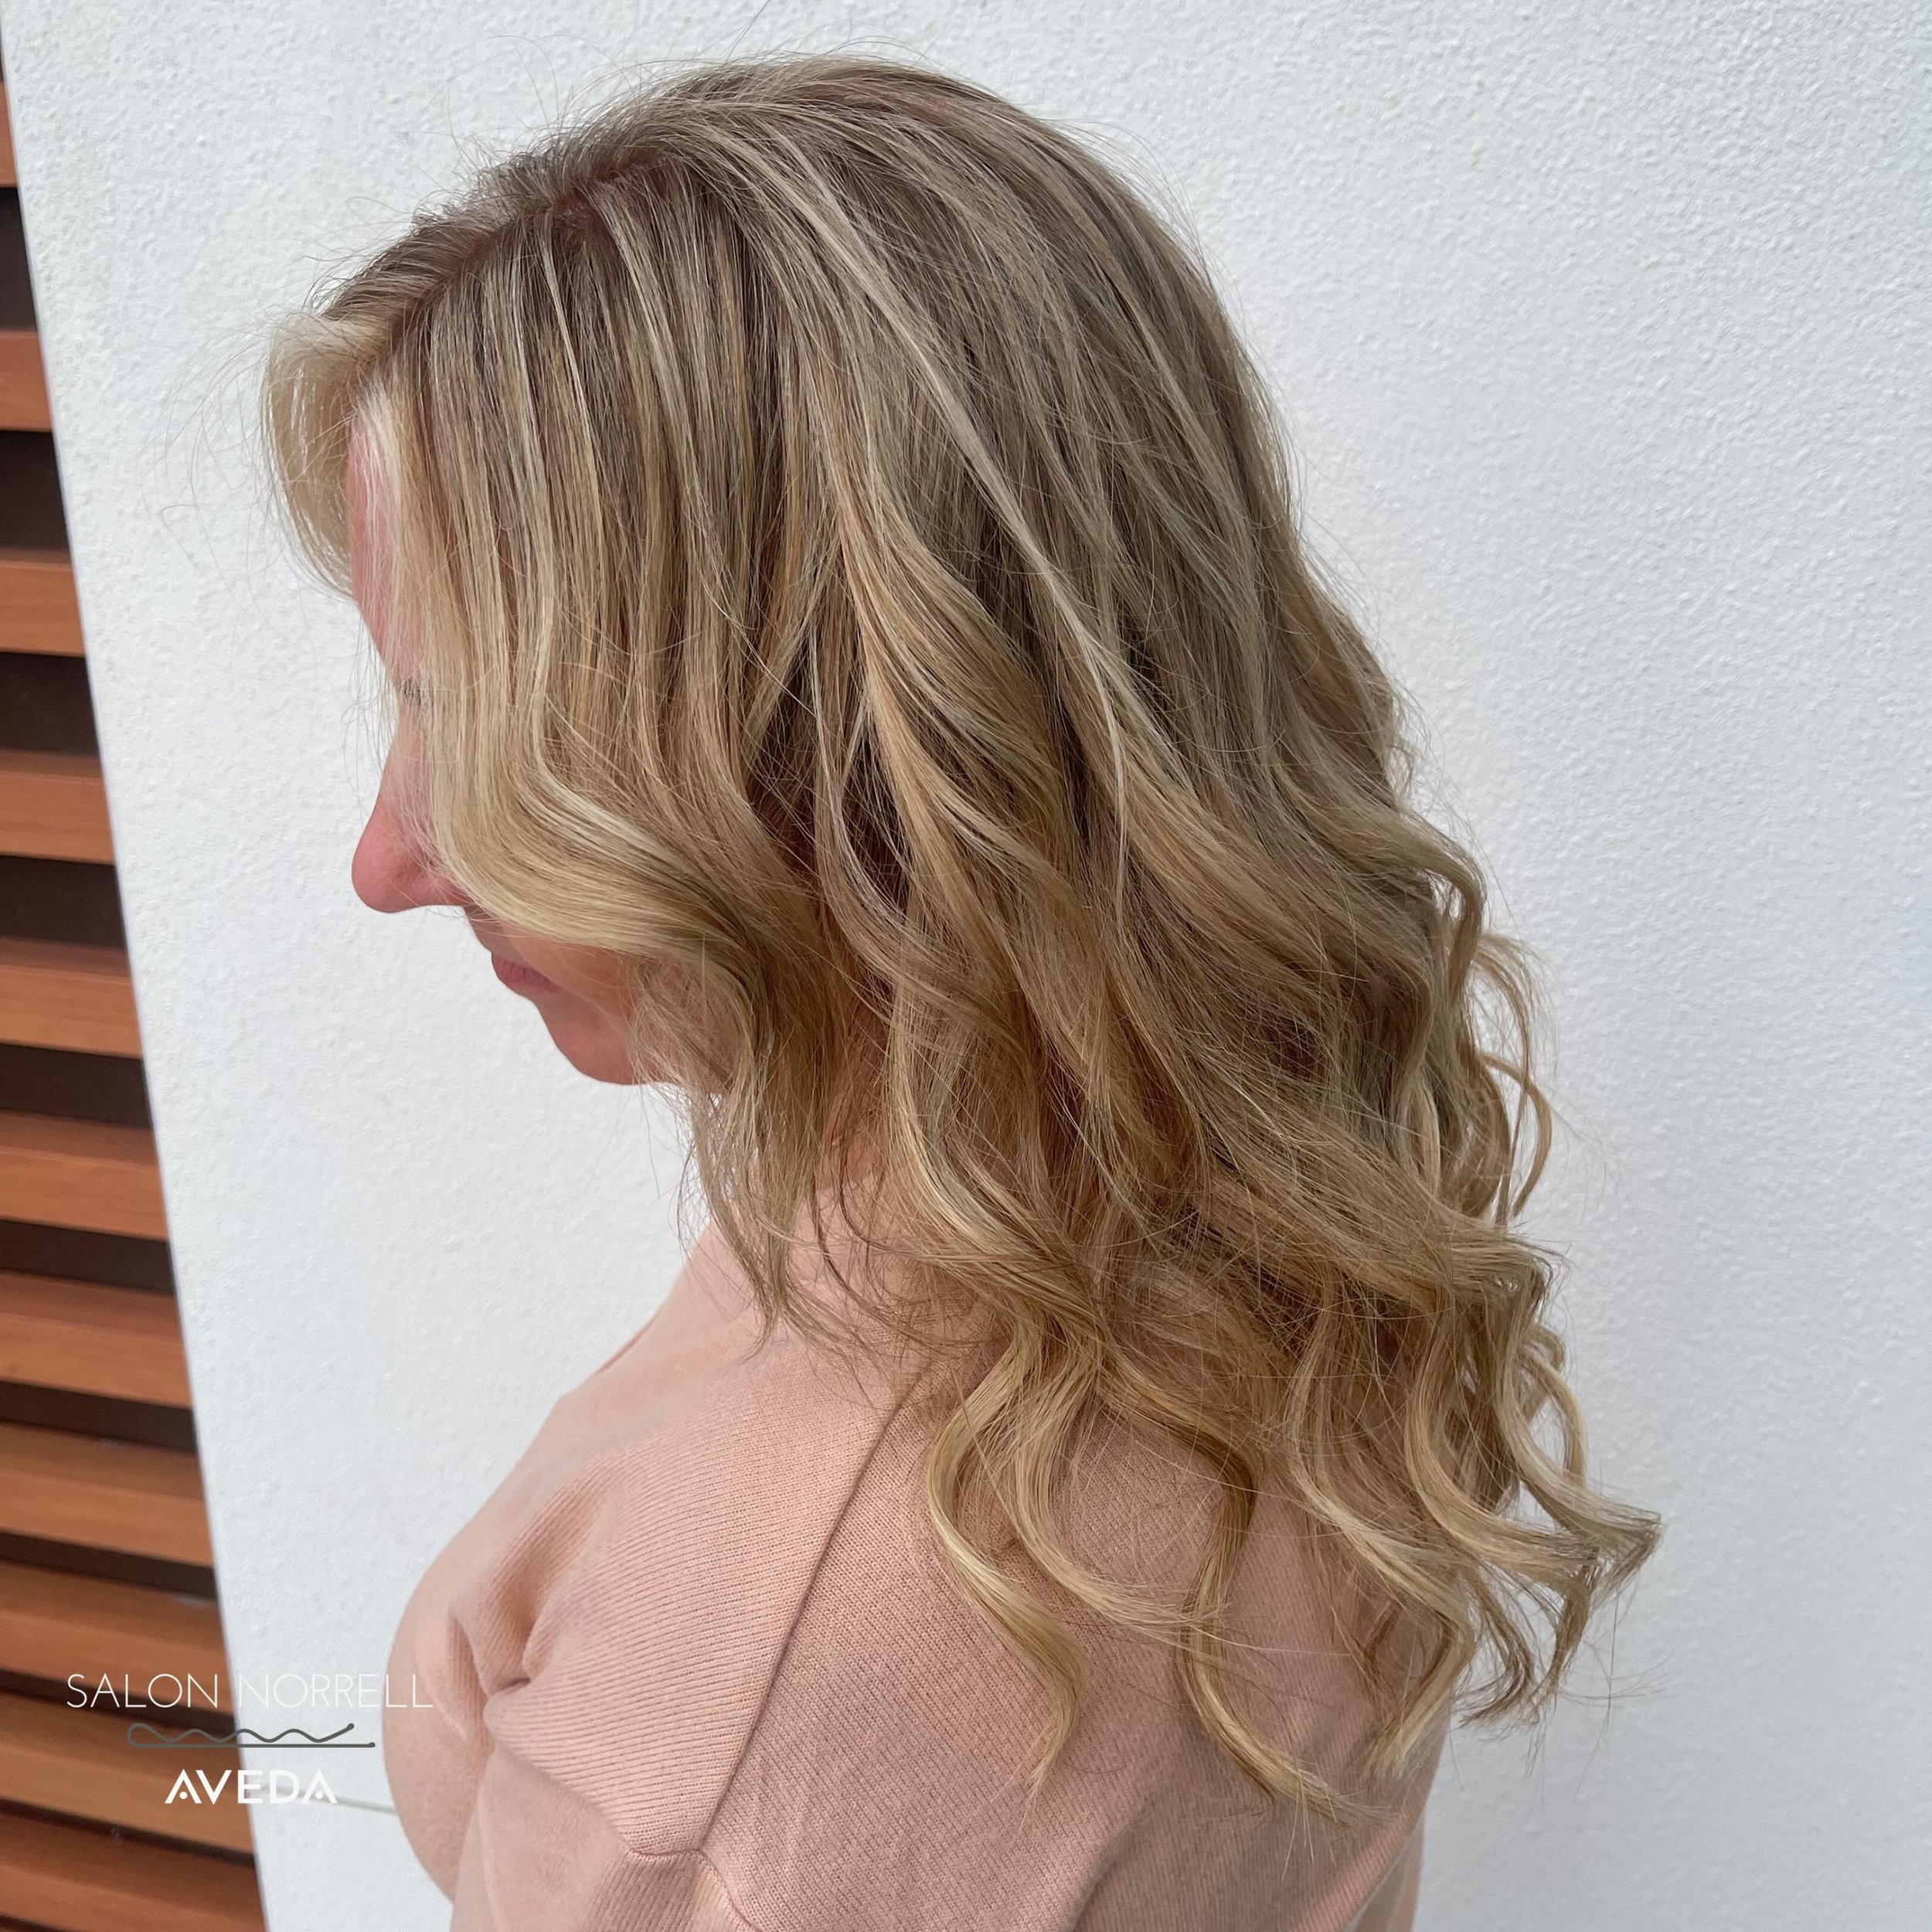 Color + Extensions | Olivia 
Make your reservation today! 
🗓Reservations are best 
📲Text 813-590-6765 
☎️Call 813-265-2000 
🔗 Link in bio to book online 
💻TampaAveda.com 
📍Tampa, Florida
 🏷 tag us #salonnorrell